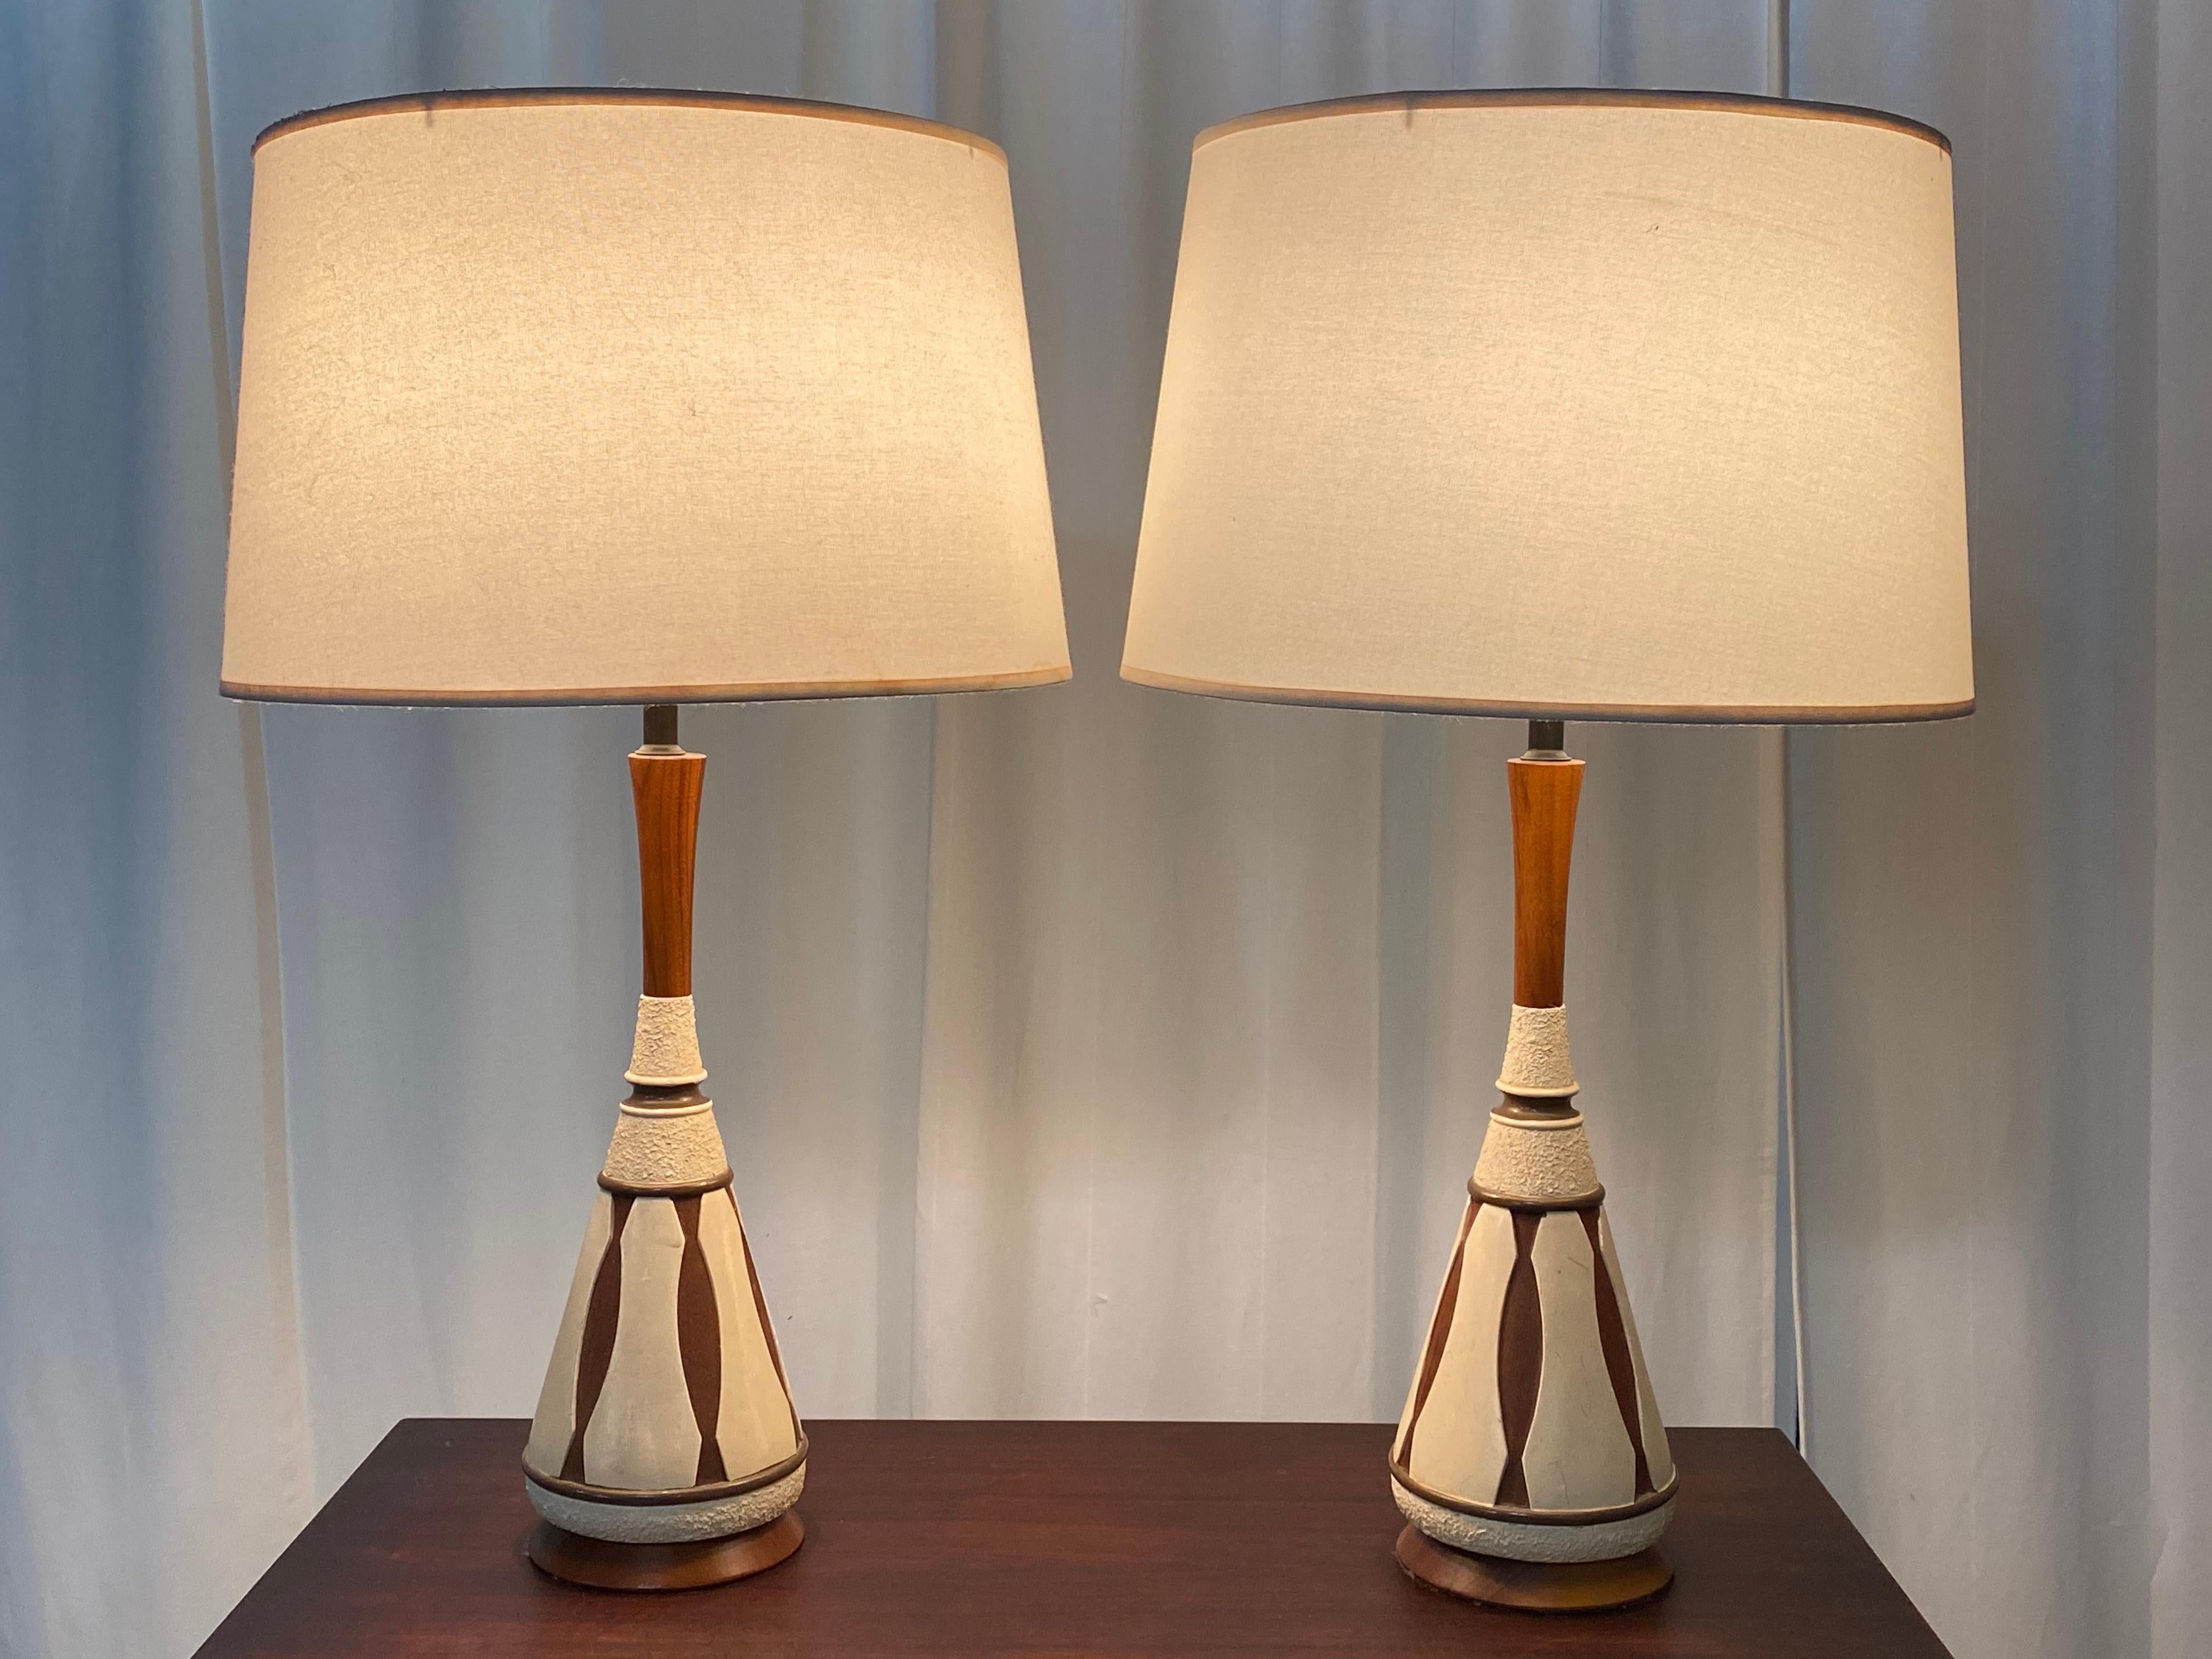 Gorgeous pair of Danish modern ceramic and teak table lamps. Elegant styling and silhouette with warm wood tones. Both work well and feature matching barrel shades and finials. Wonderful lines makes them interesting in their own right yet able to